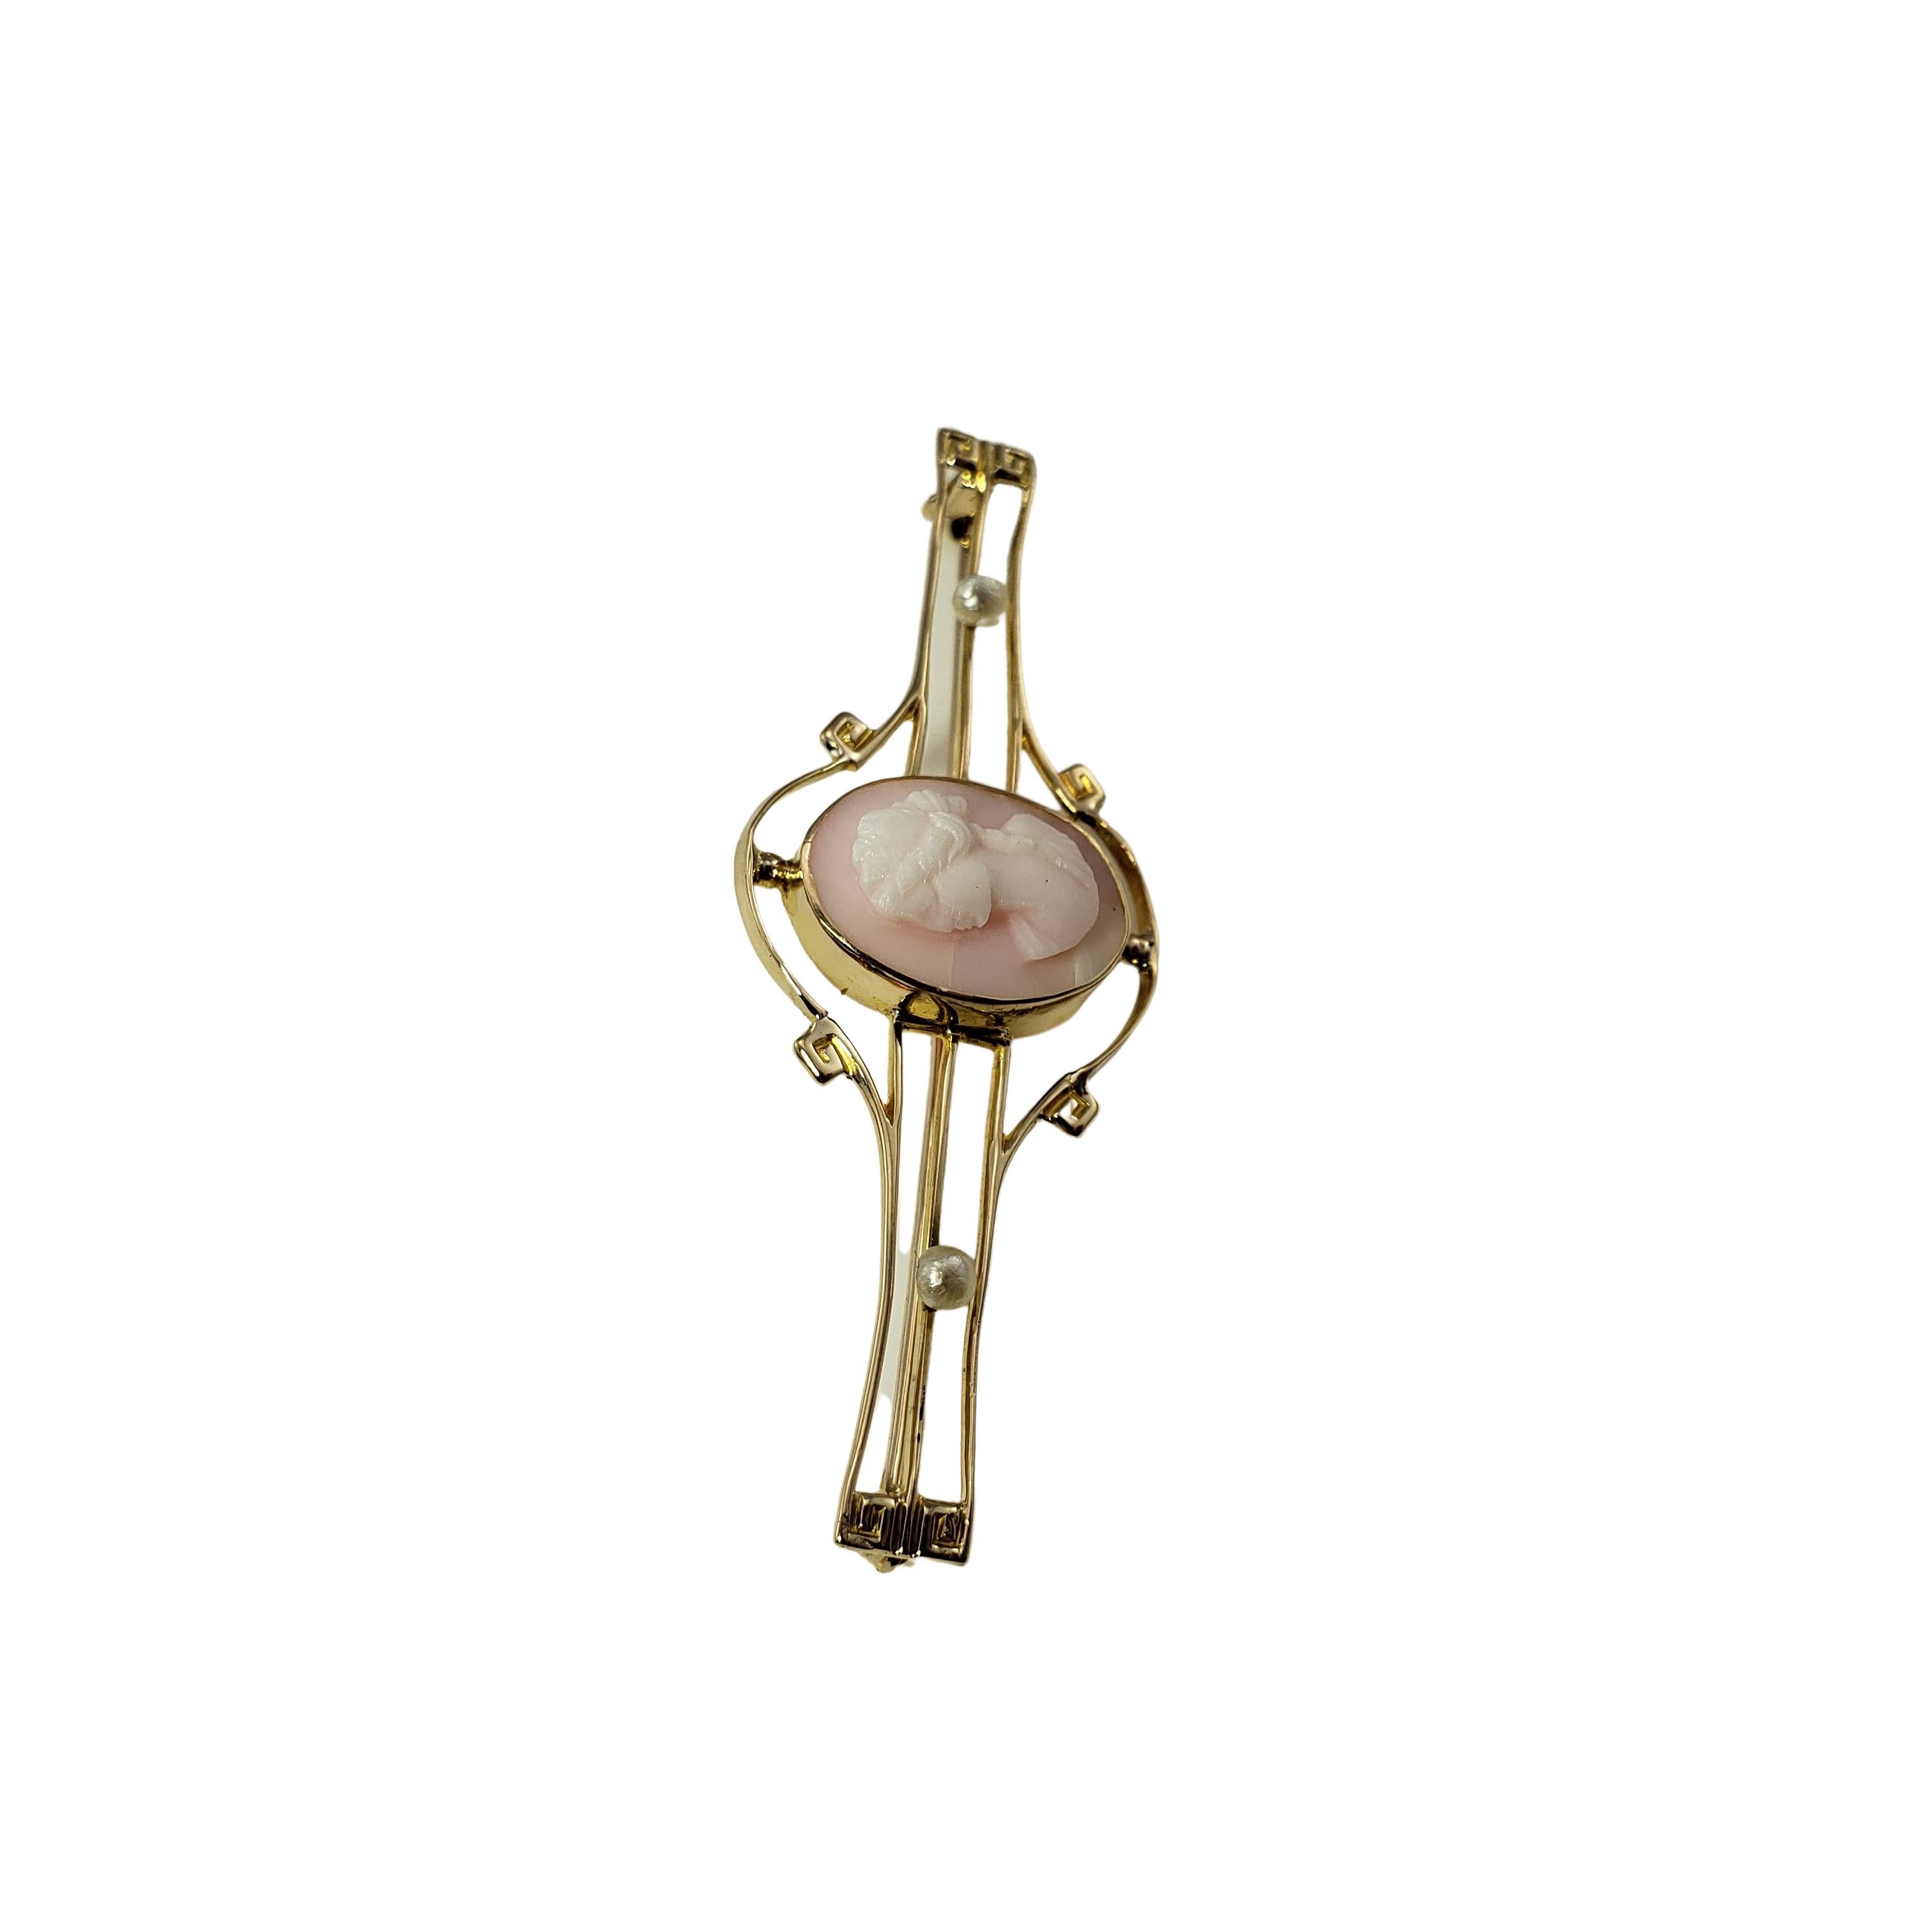 10 Karat Yellow Gold Cameo Bar Pin/Brooch-

This lovely pink cameo bar pin is accented with two seed pearls set in classic 10K yellow gold.

Size:  53 mm x 19 mm

Weight:  1.8 dwt. /  2.8 gr.

Stamped: 10K 

Very good condition, professionally